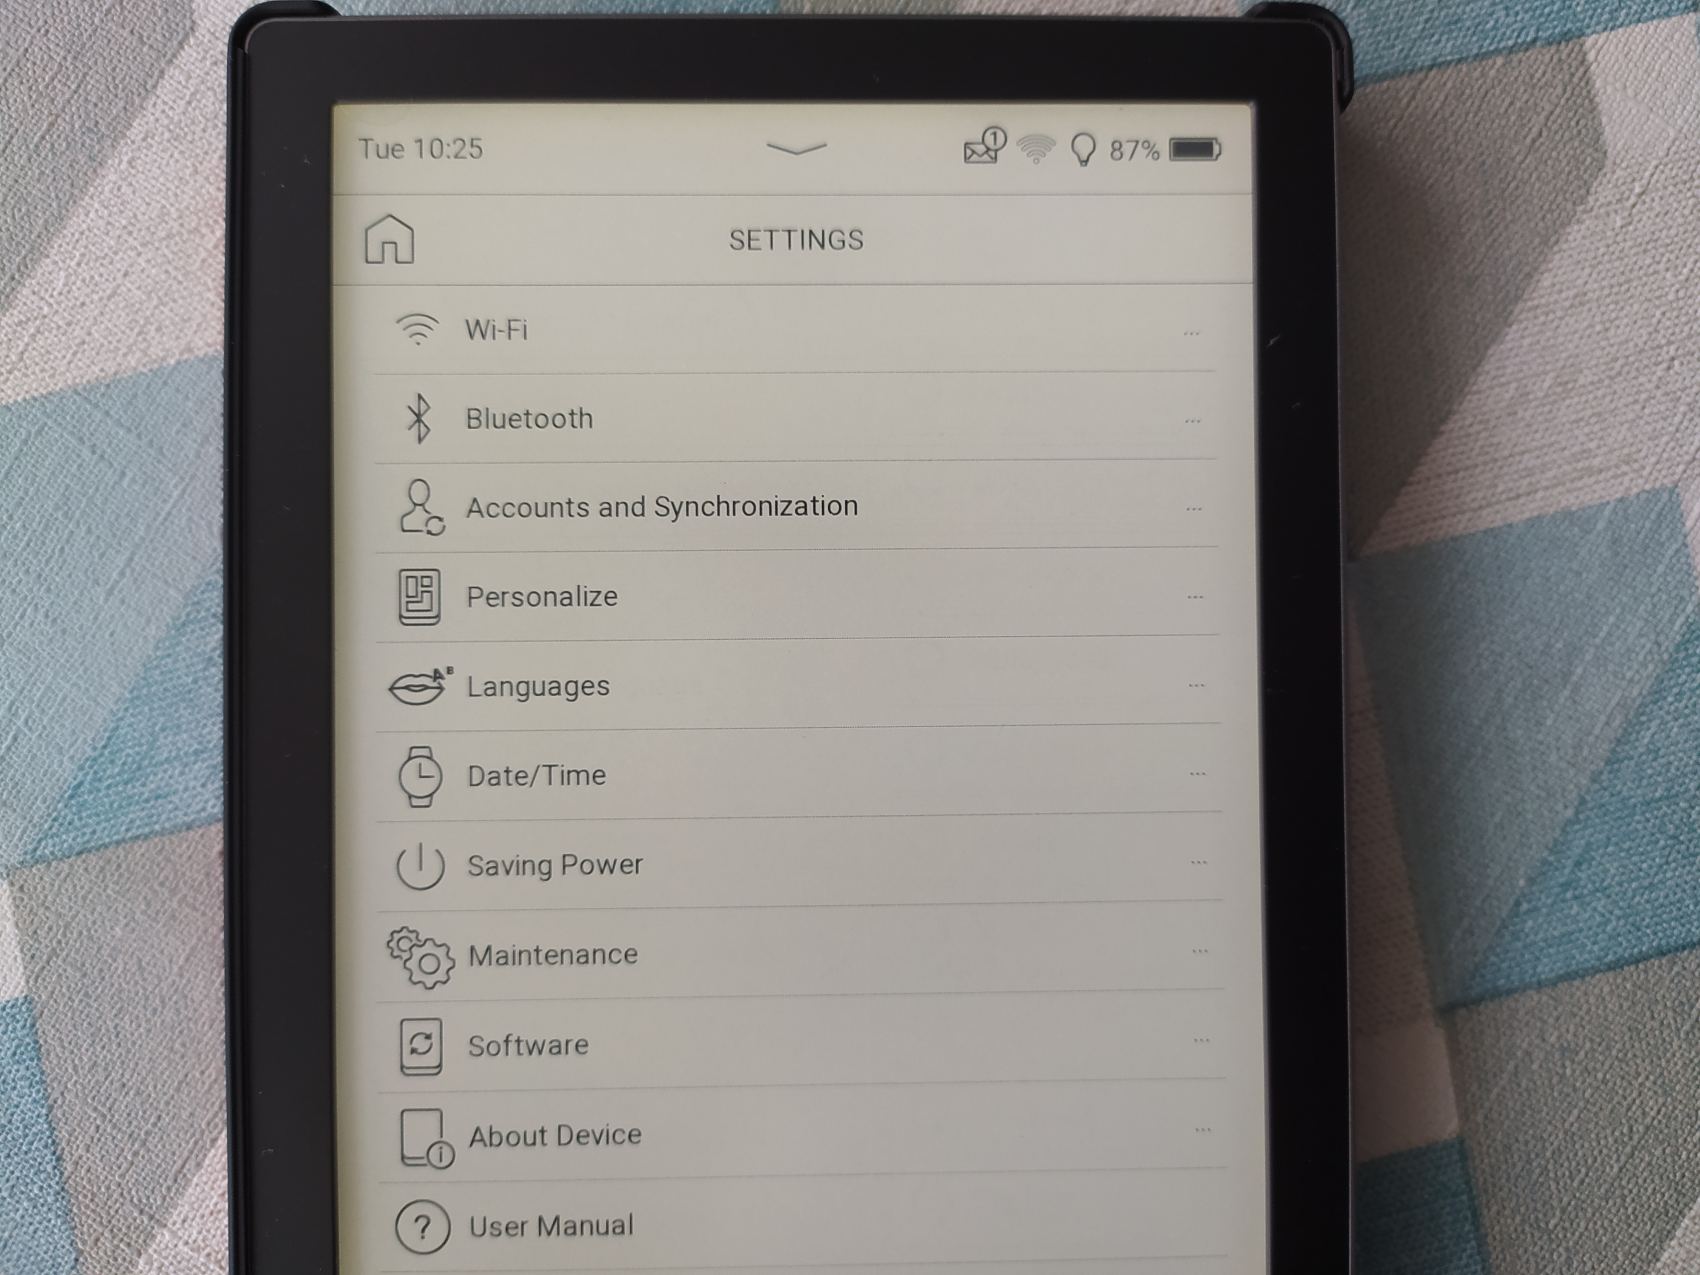 pocketbook touchscreen settings